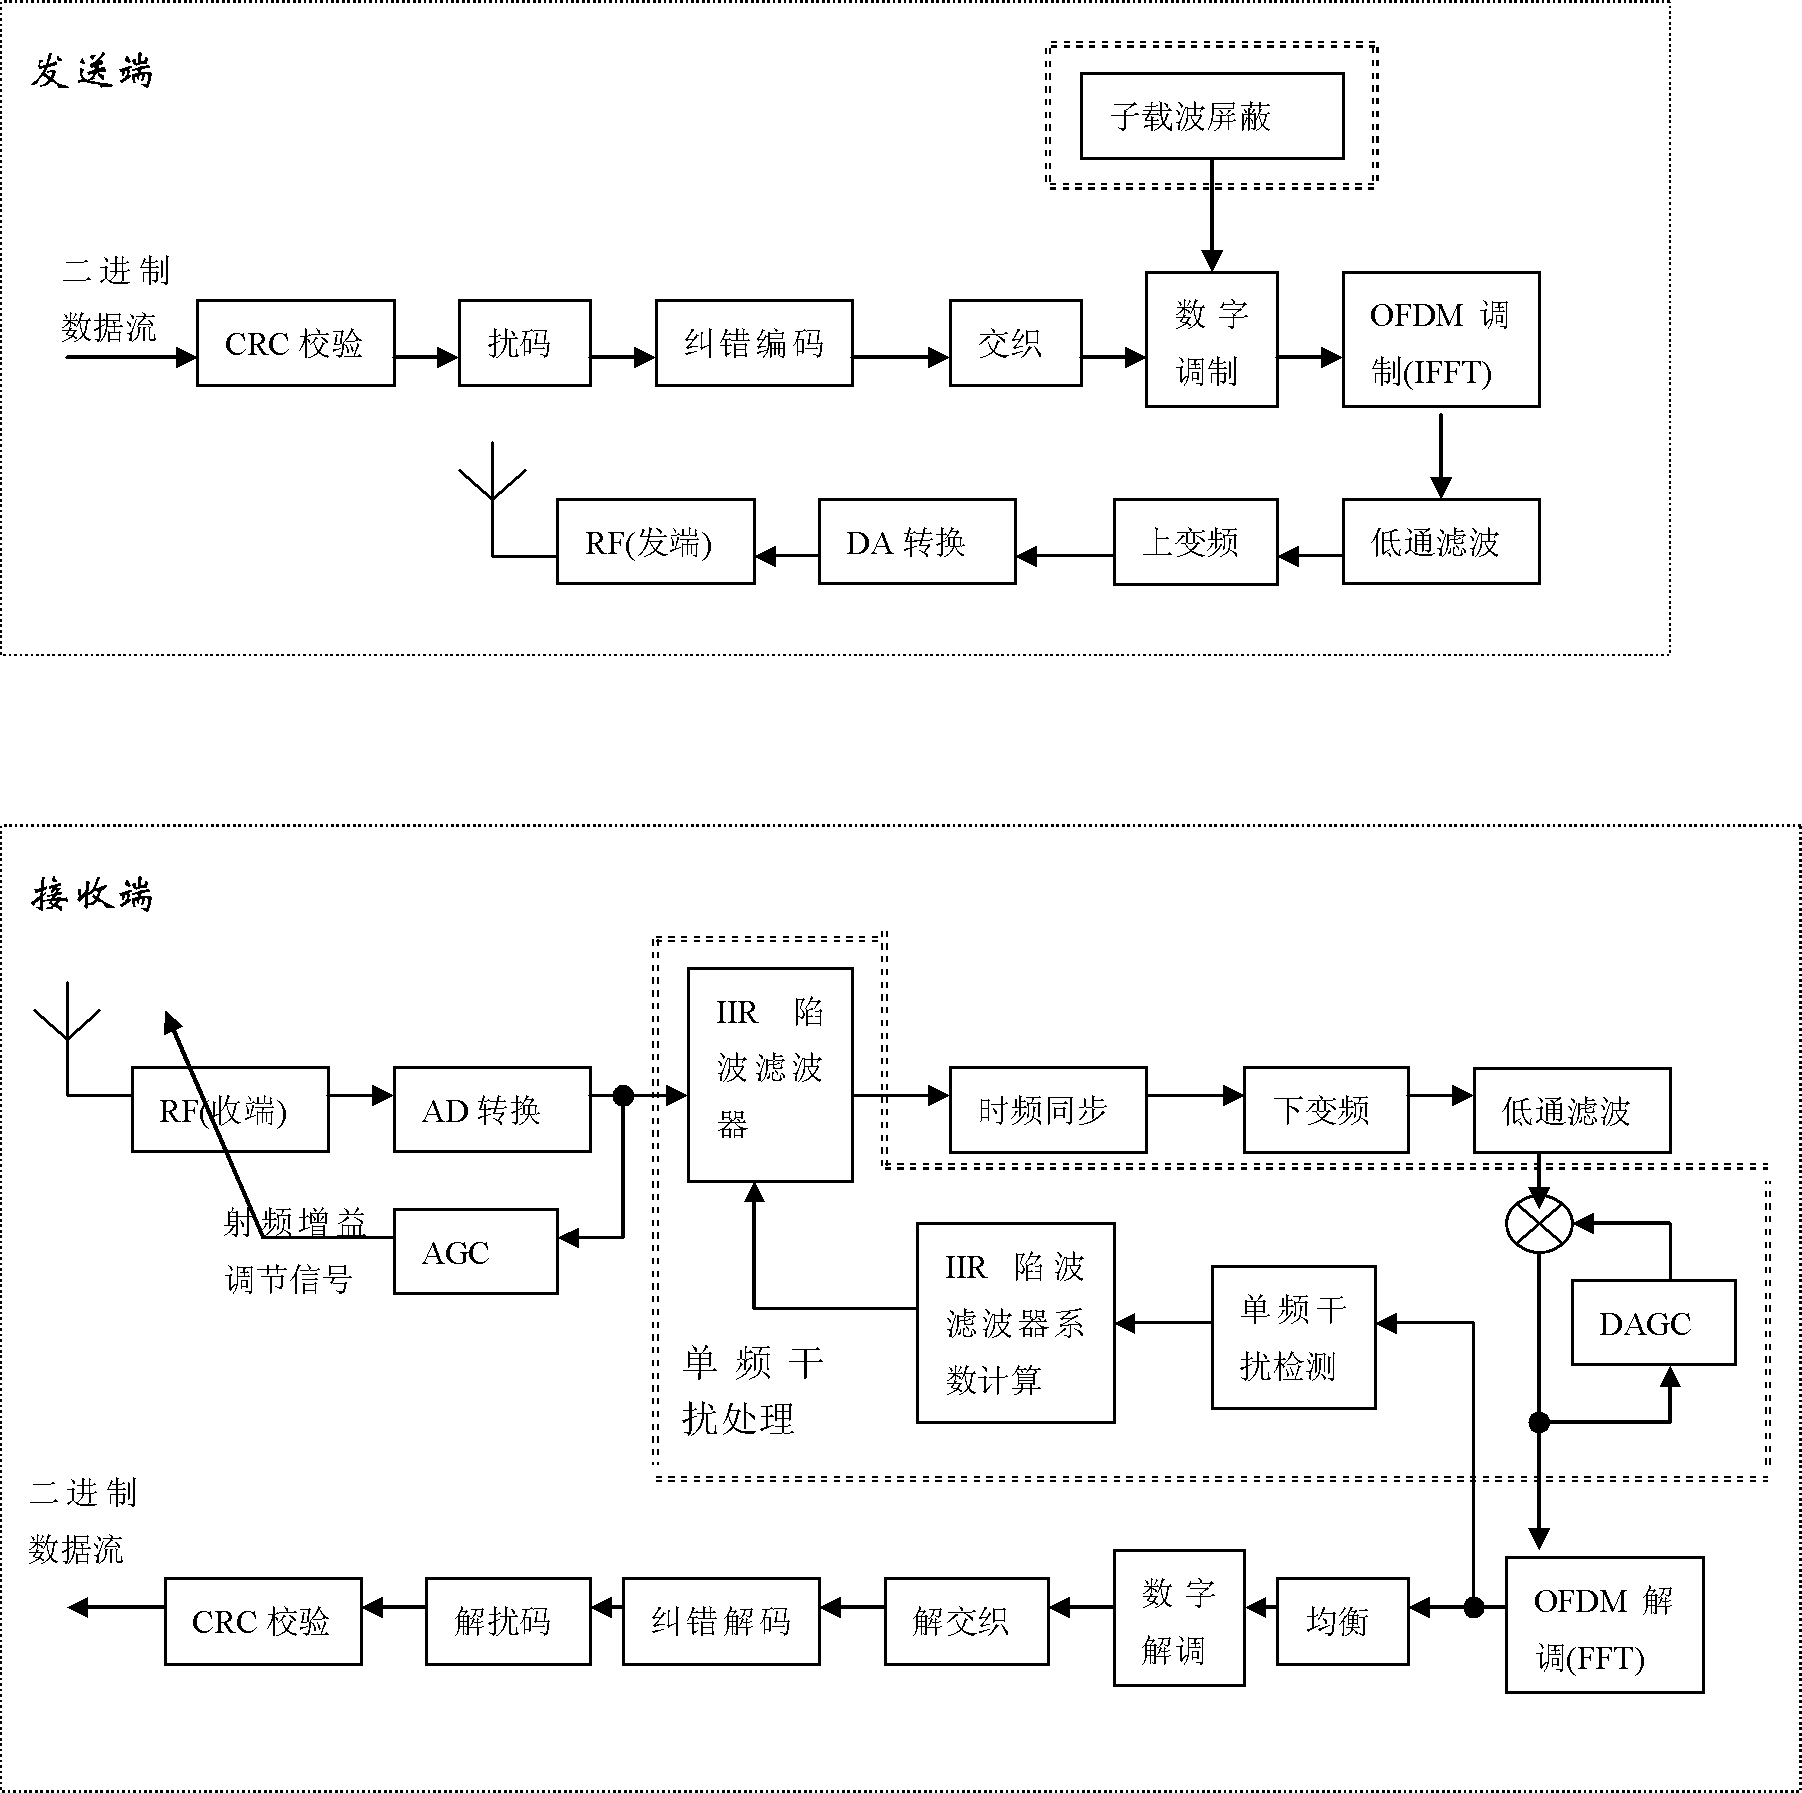 Suppression method for single-frequency interference in OFDM (Orthogonal Frequency Division Multiplexing) communication system